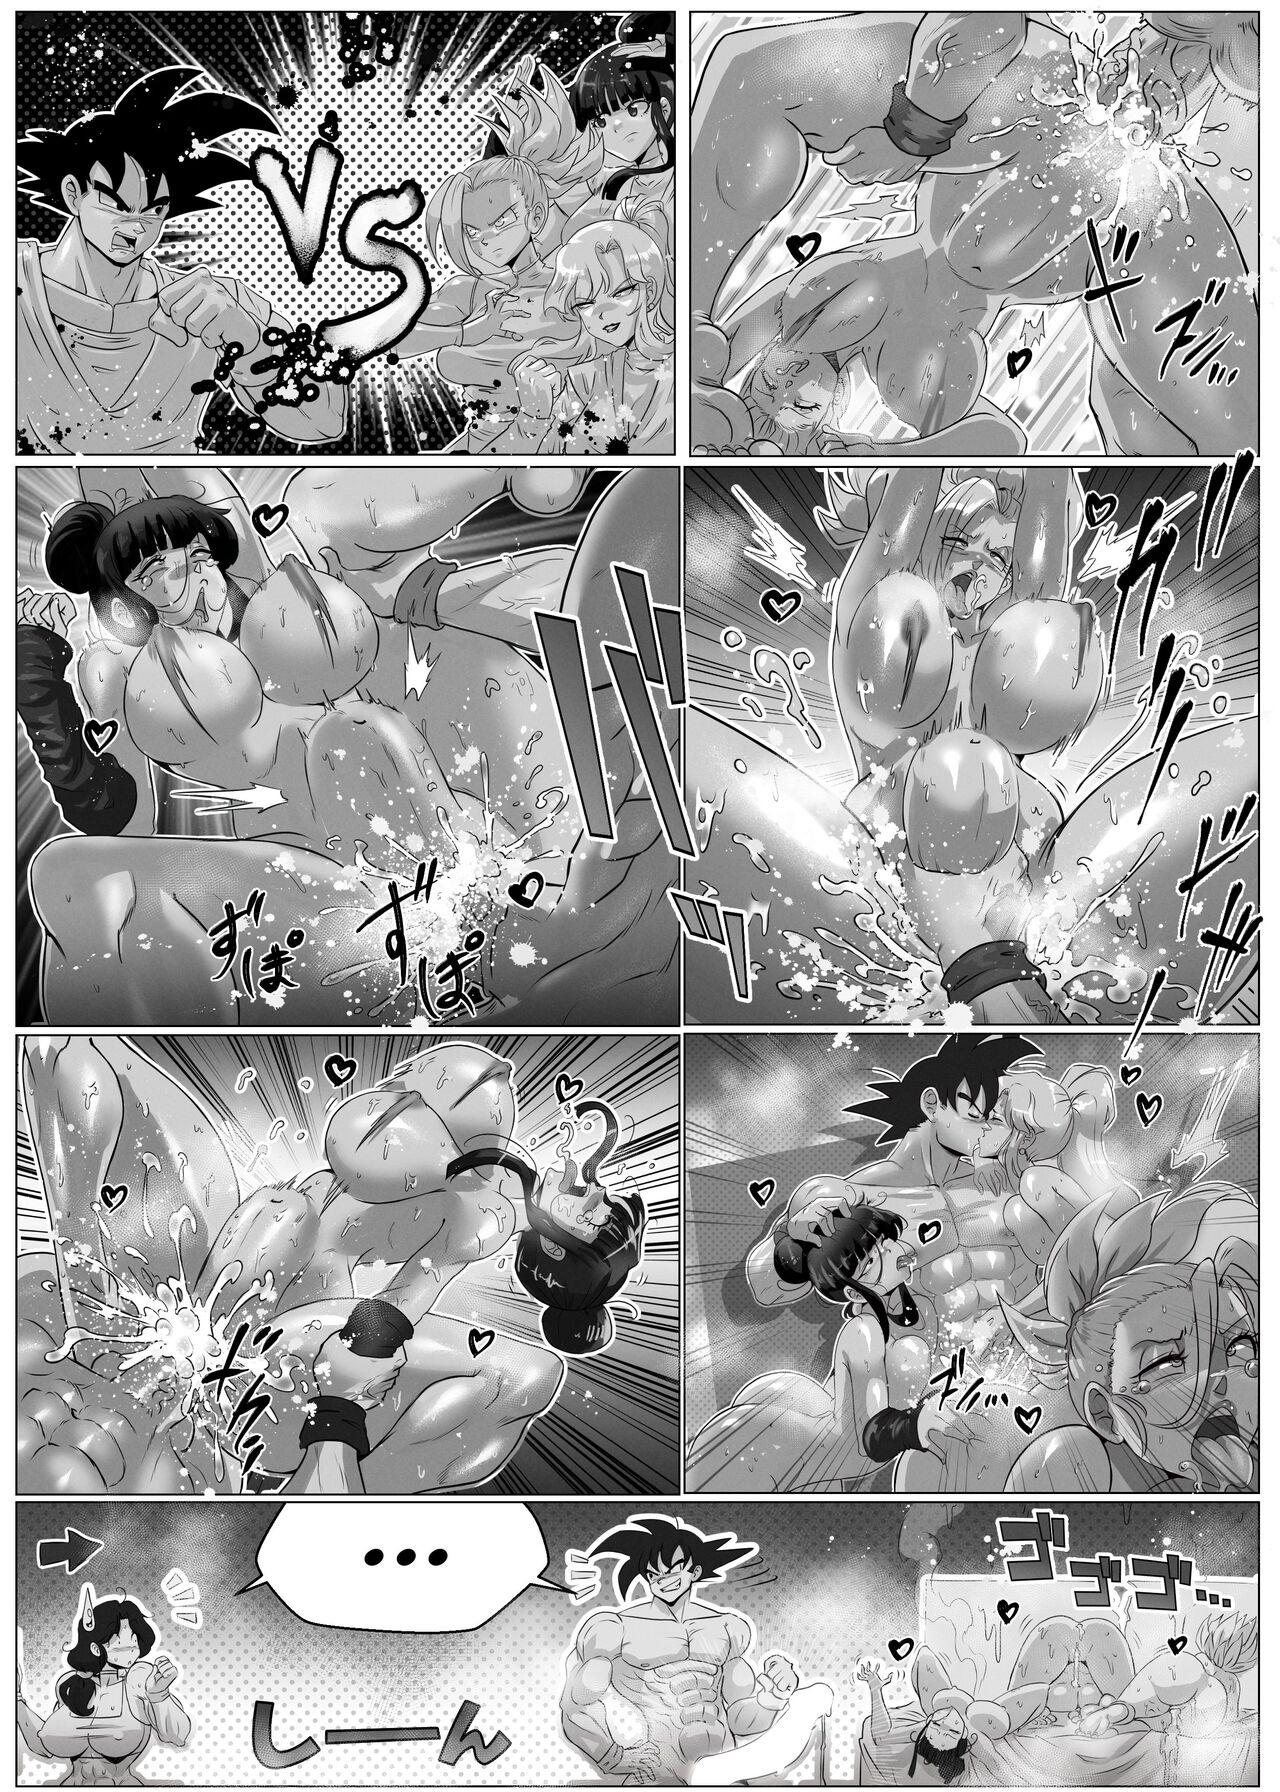 Sex Party goku vs chichi from different world - Dragon ball z Dragon ball Dragon ball super Puto - Page 2